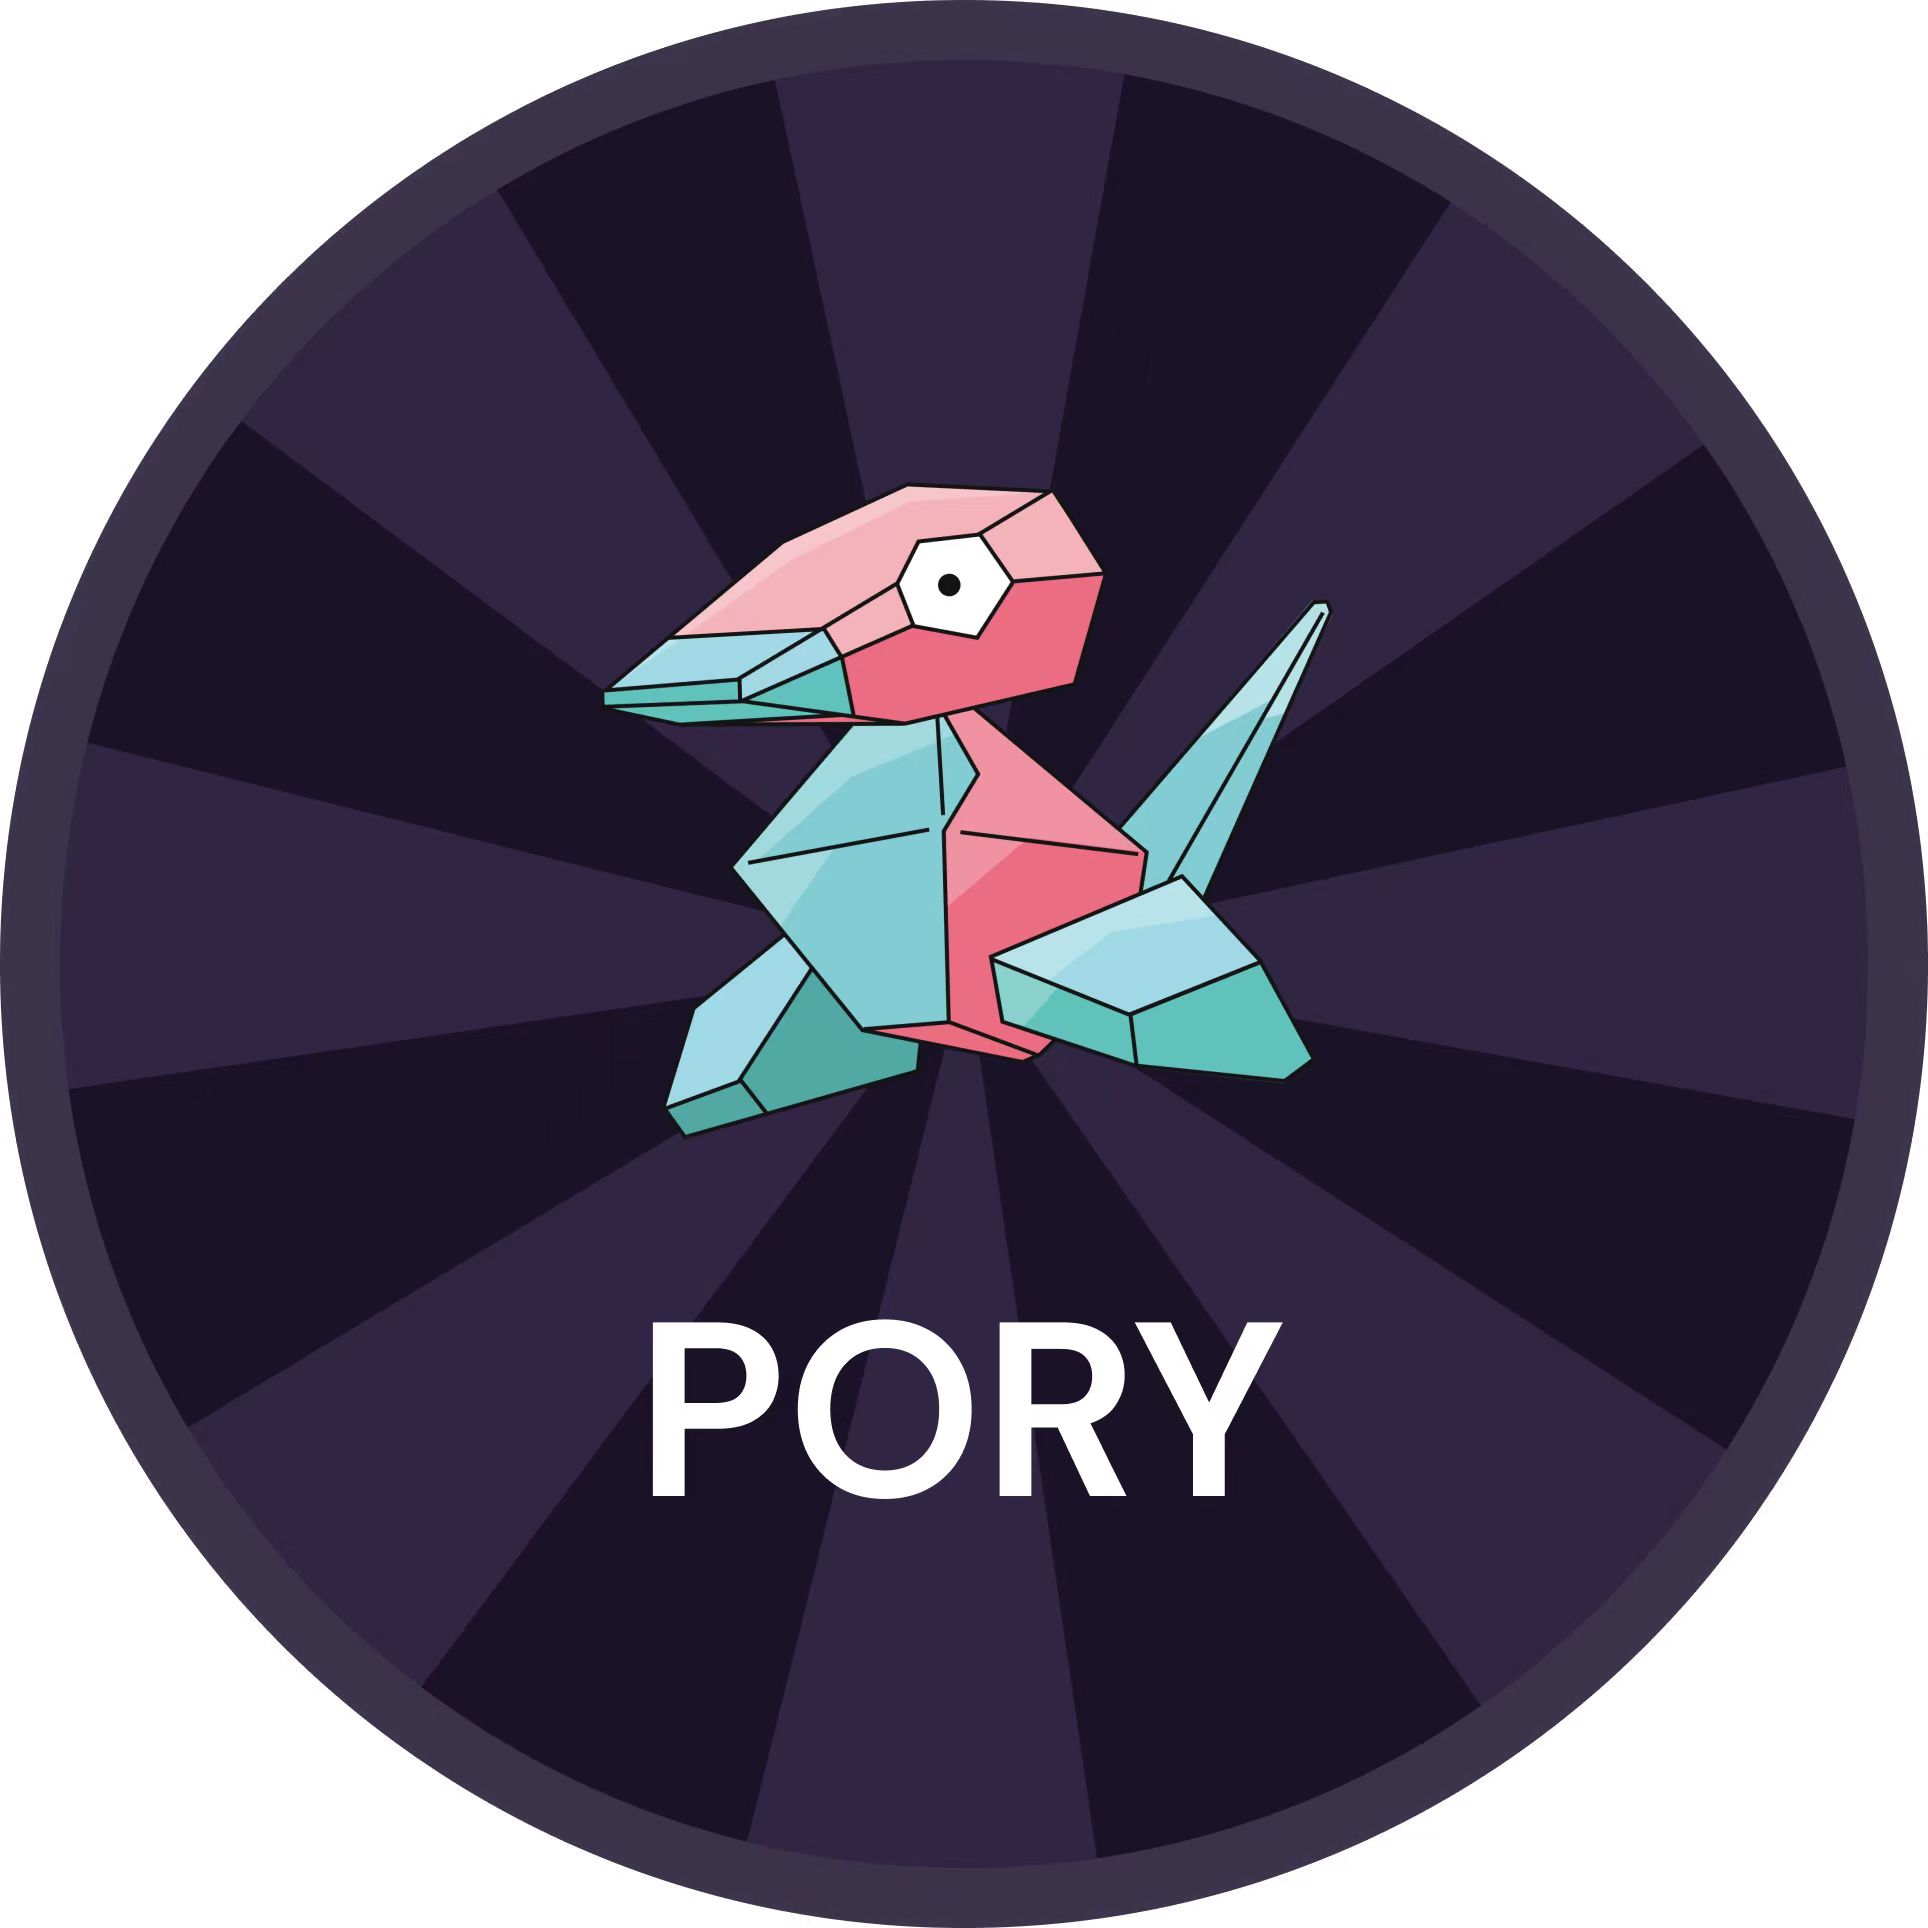 PORY Emerges as Top Meme Coin on Polygon (MATIC) Network, Paving the Way for Broader Cryptocurrency Recognition